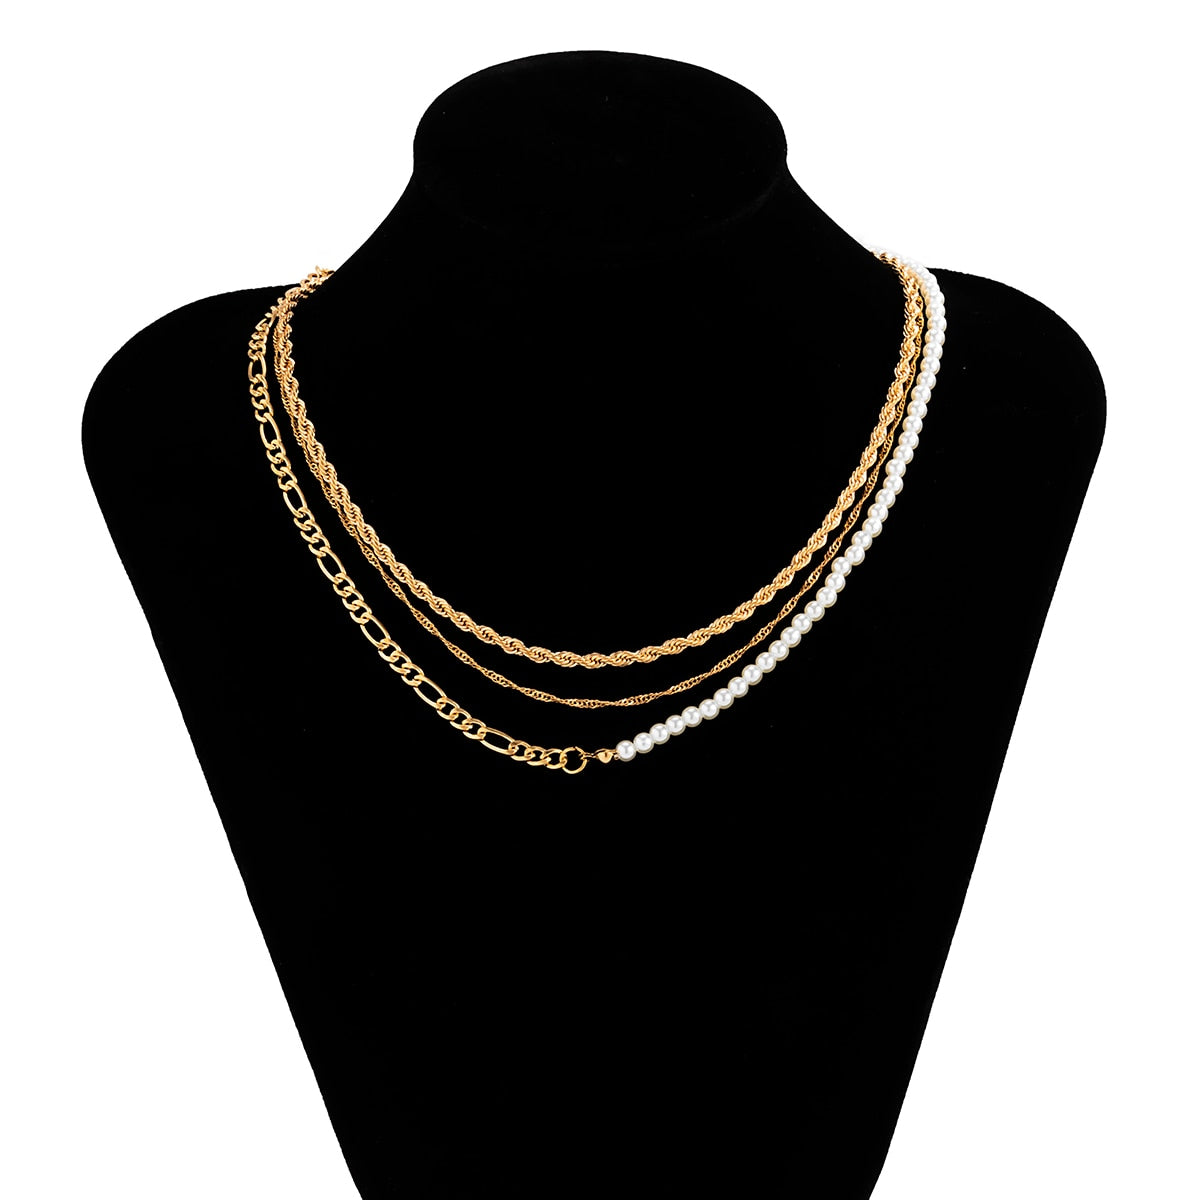 SHIXIN Asymmetry Pearl Beads Thin Link Chain Choker Necklace Set Men/Women Punk Multi Layered Necklace Chain on the Neck Jewelry